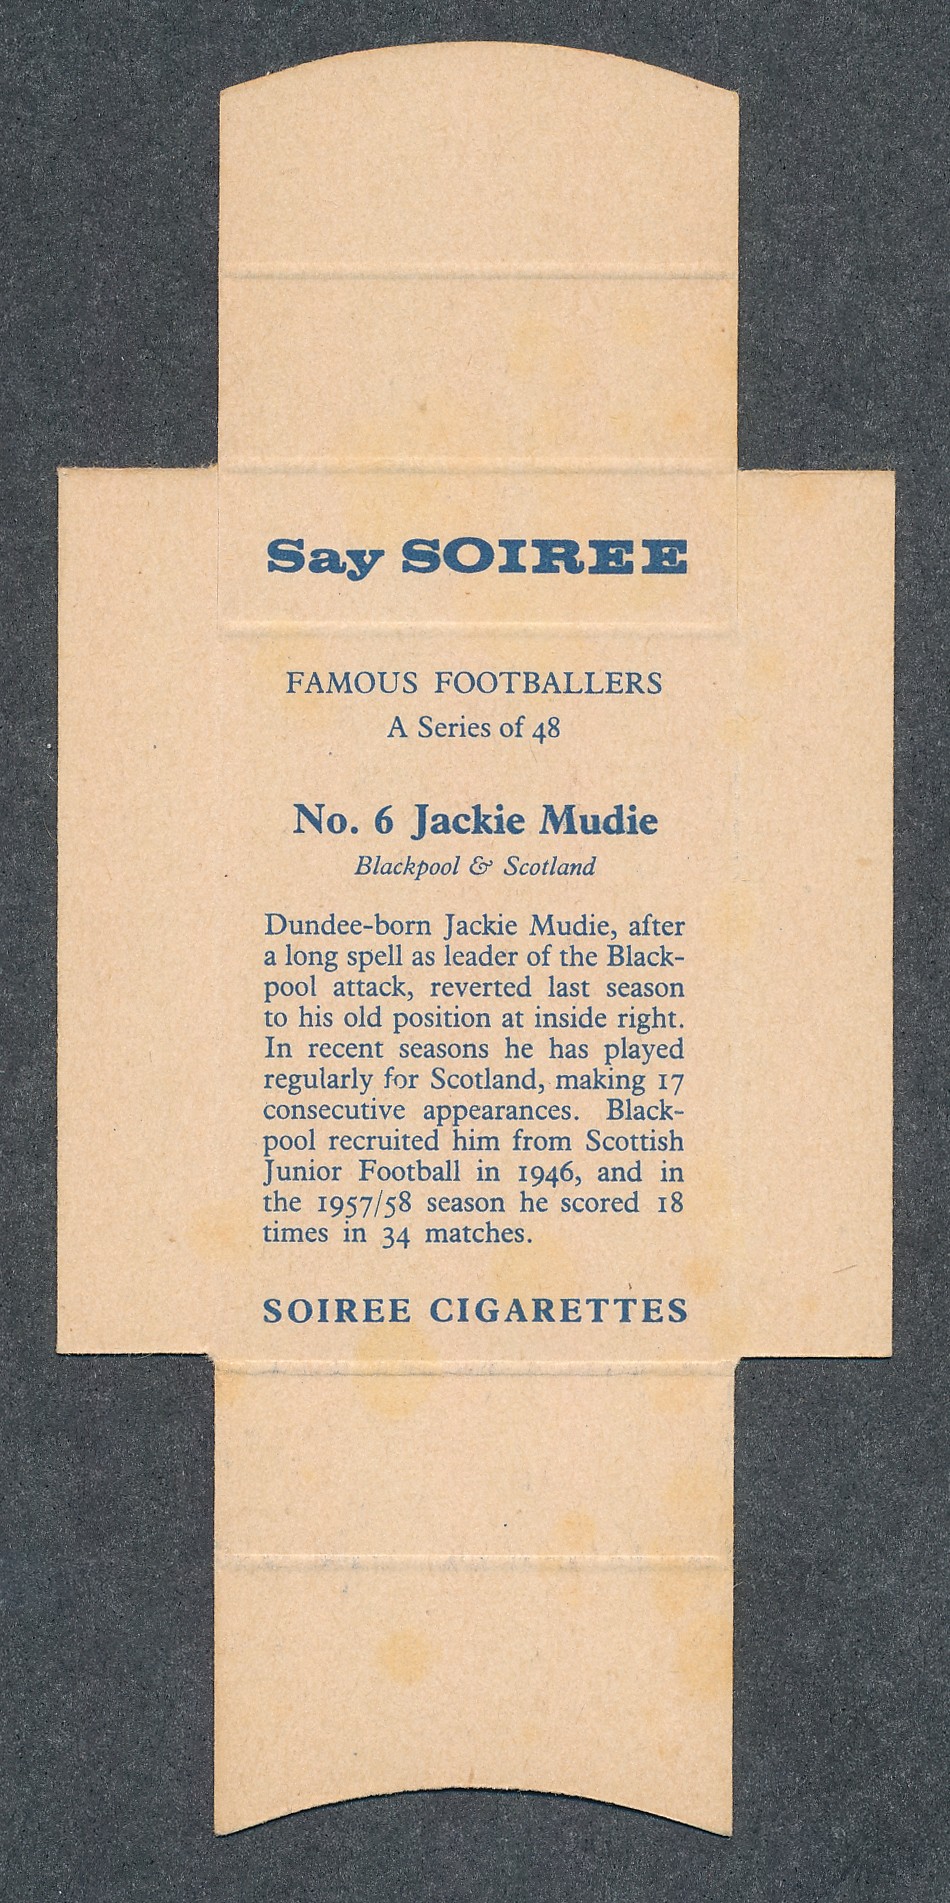 Soiree Cigarettes, Mauritius, Famous Footballers uncut packet issue, No.6 Jackie Mudie, - Image 2 of 2